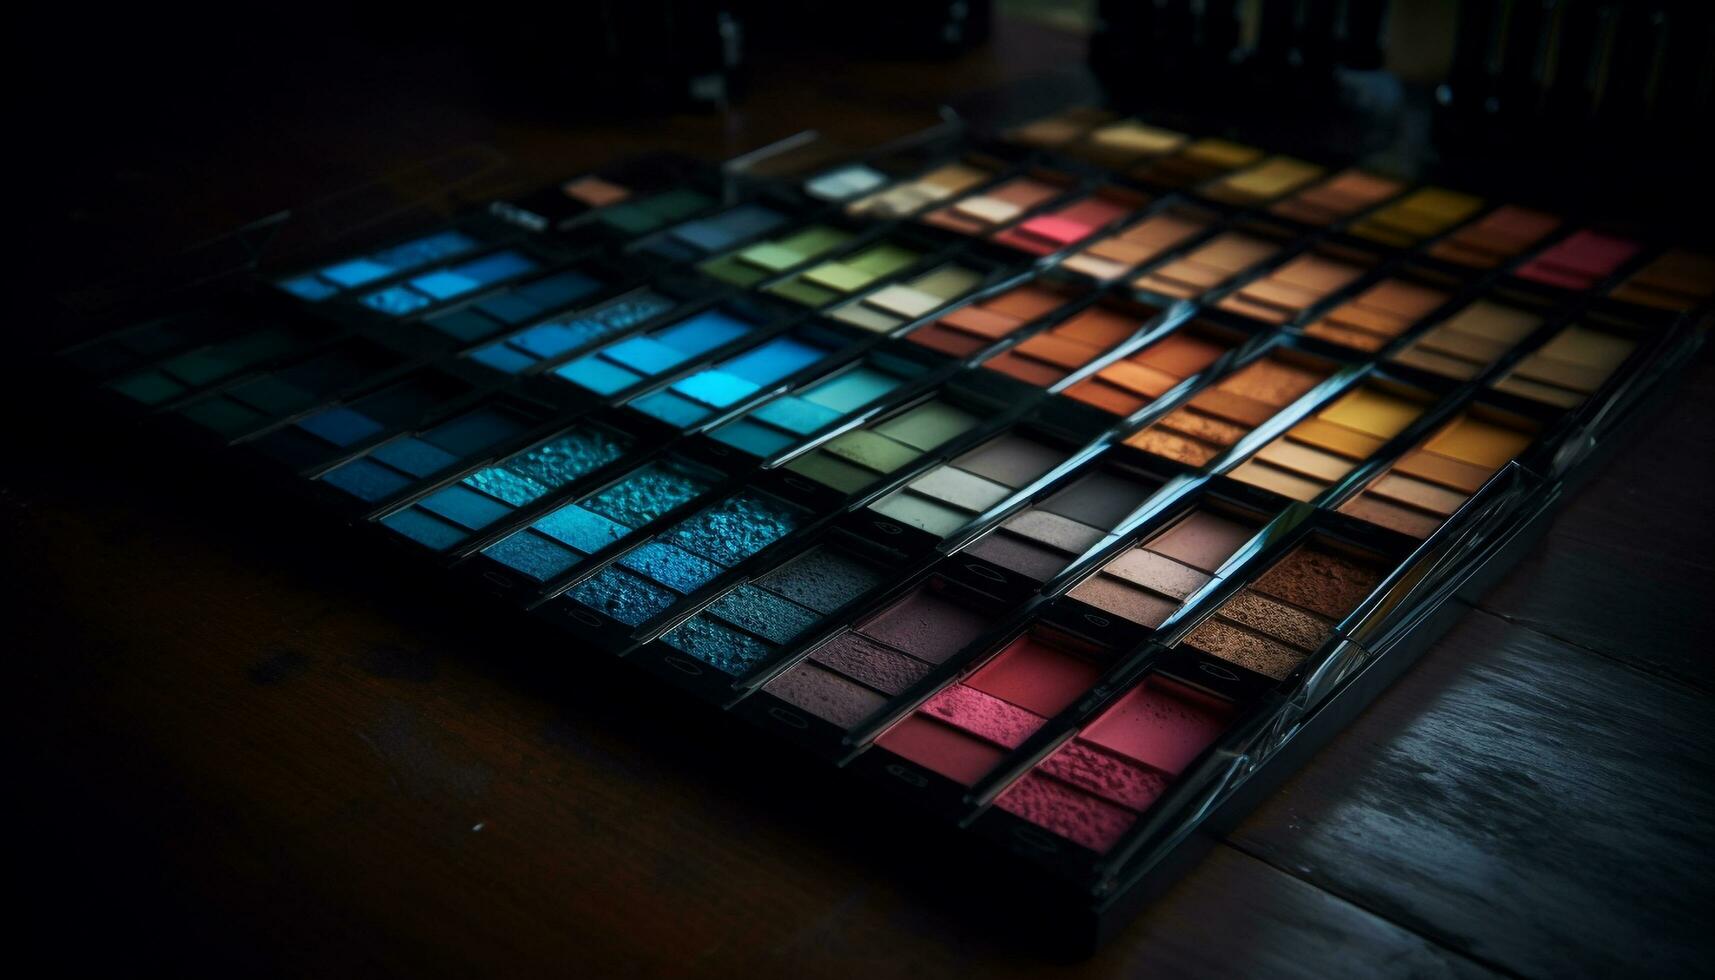 A vibrant collection of colorful eyeshadow palettes for fashion enthusiasts generated by AI photo